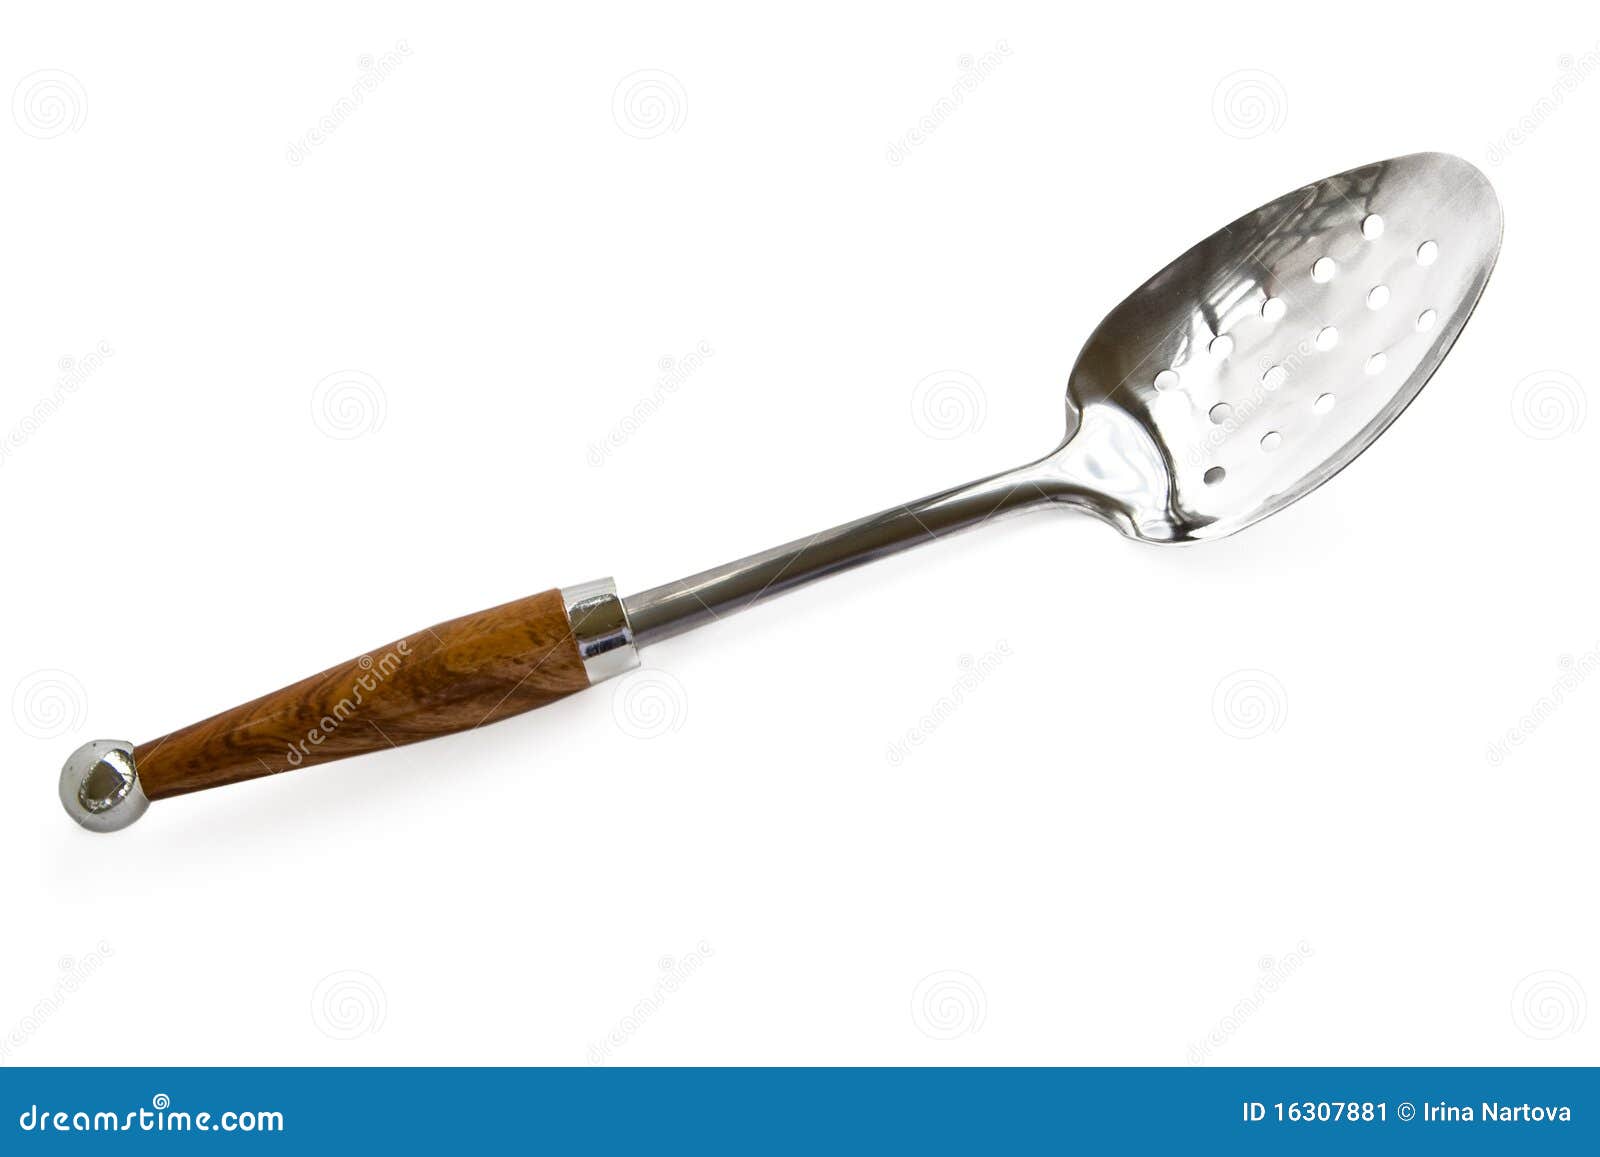 slotted spoon